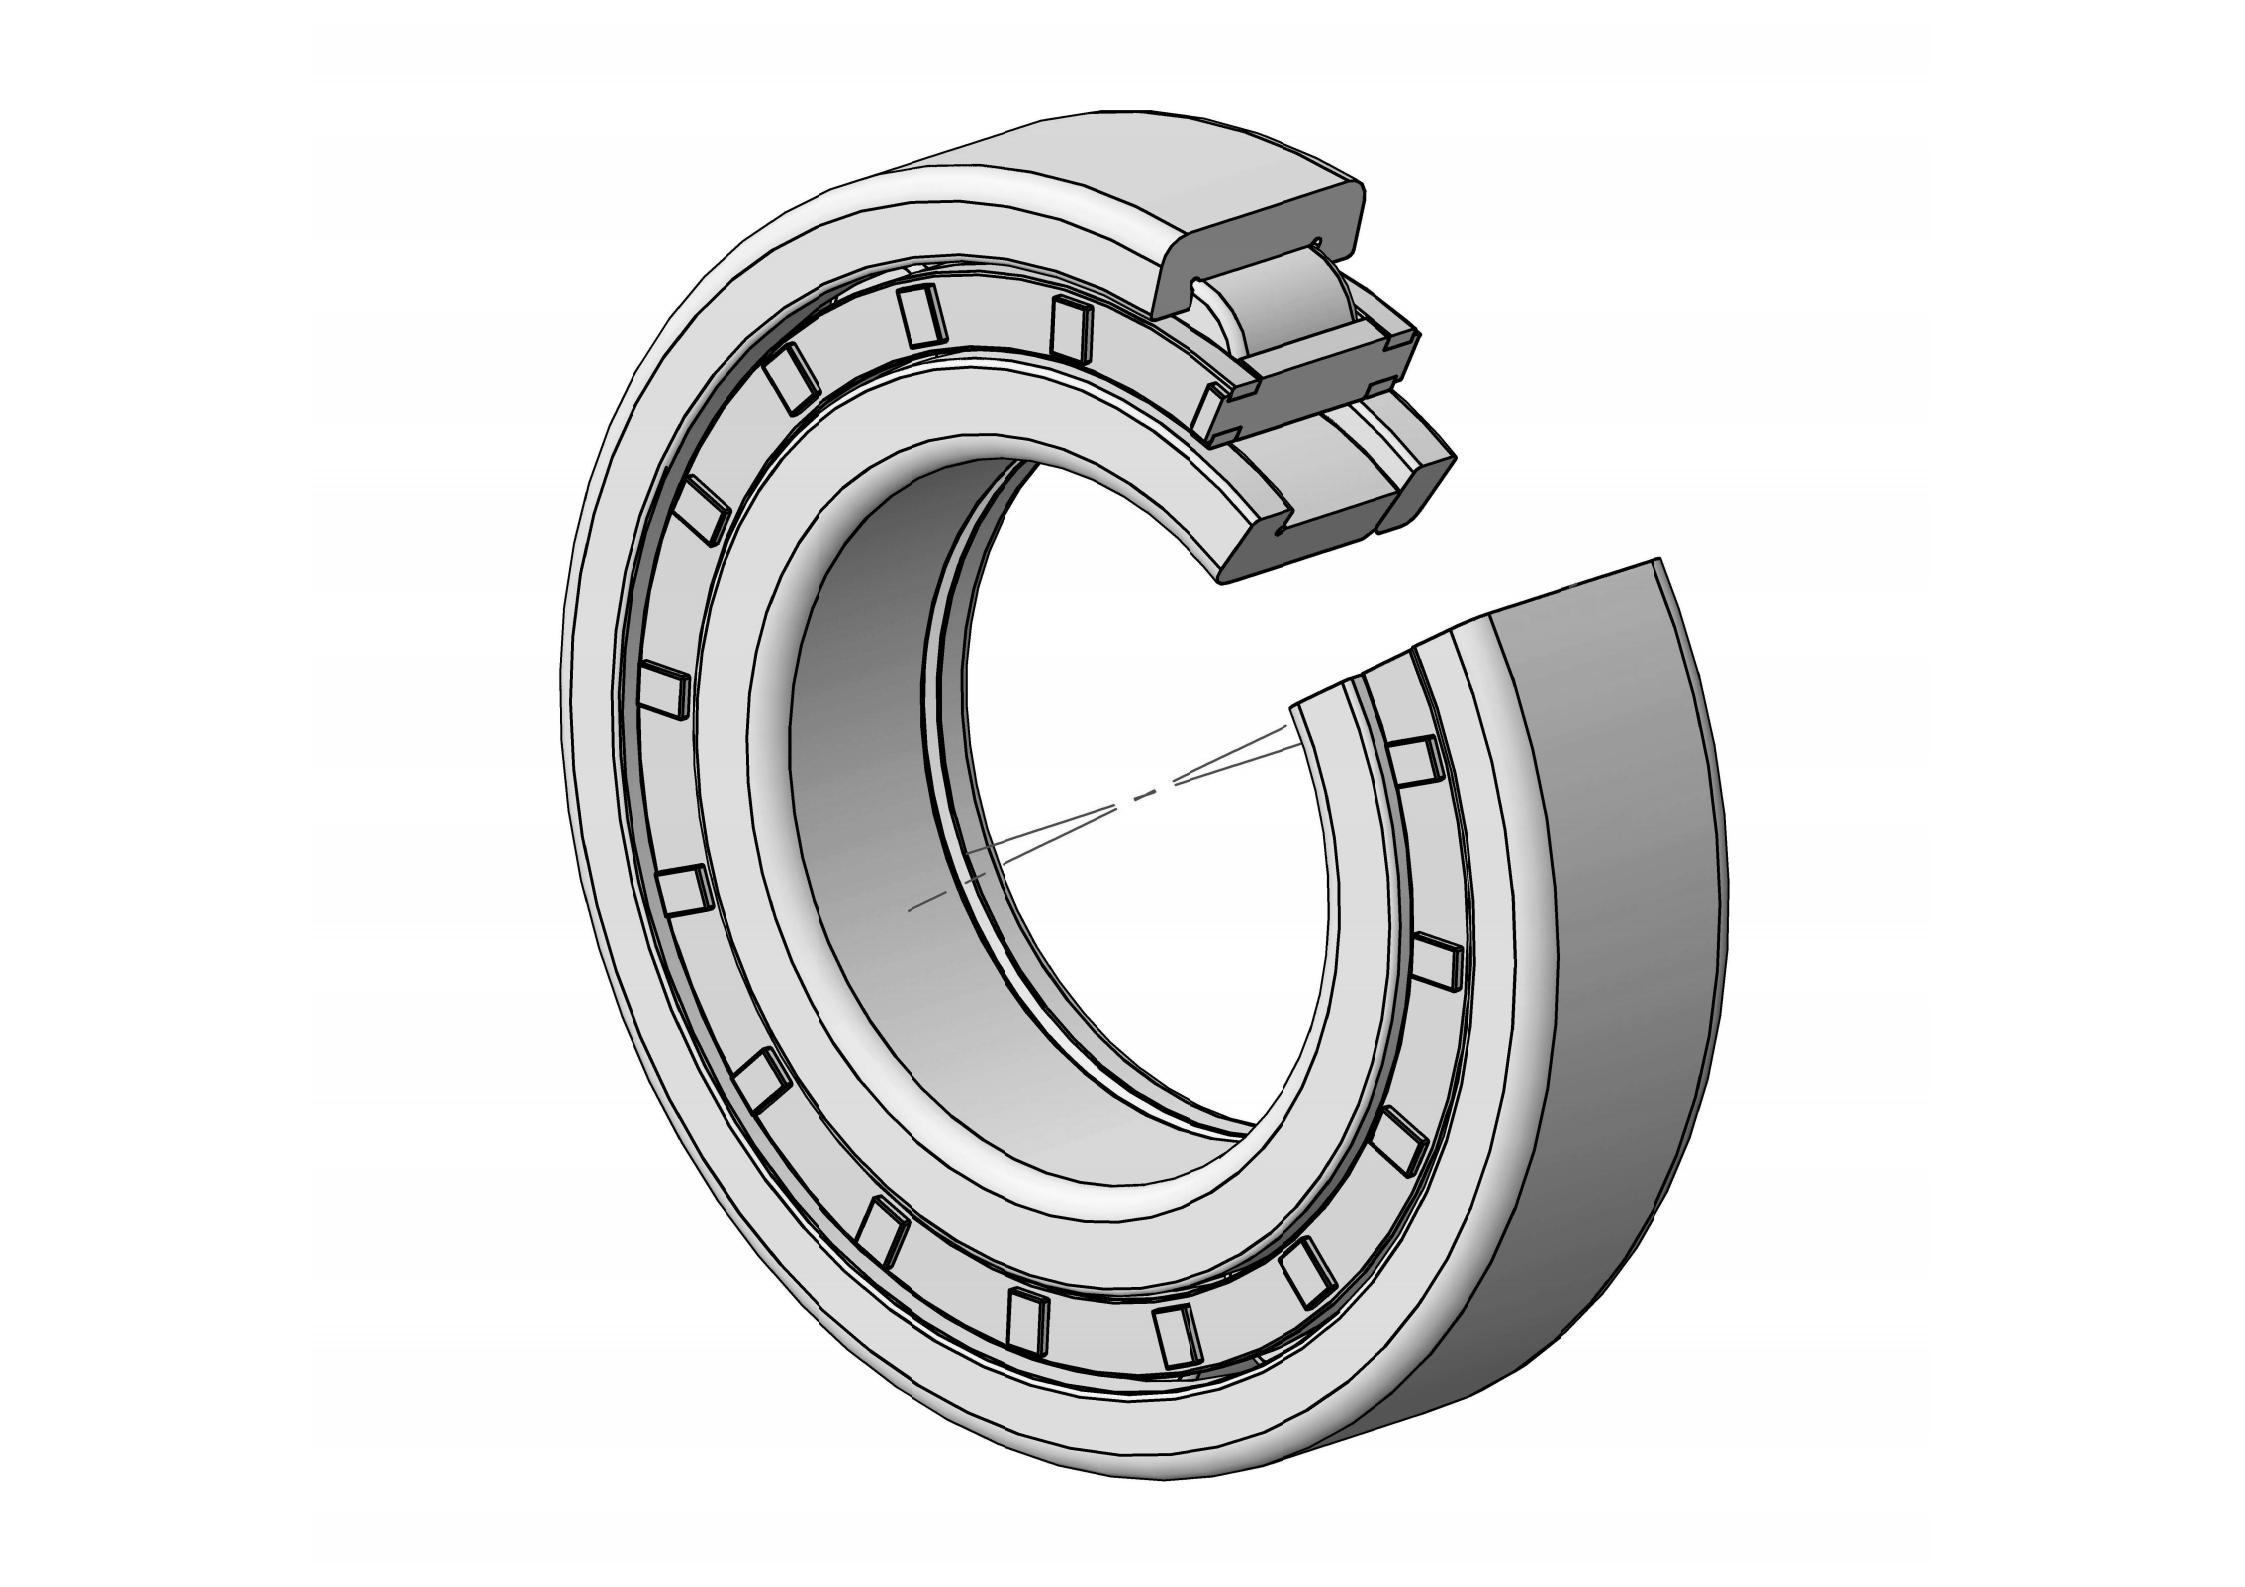 NUP308-E Single Row Cylindrical roller bearing 